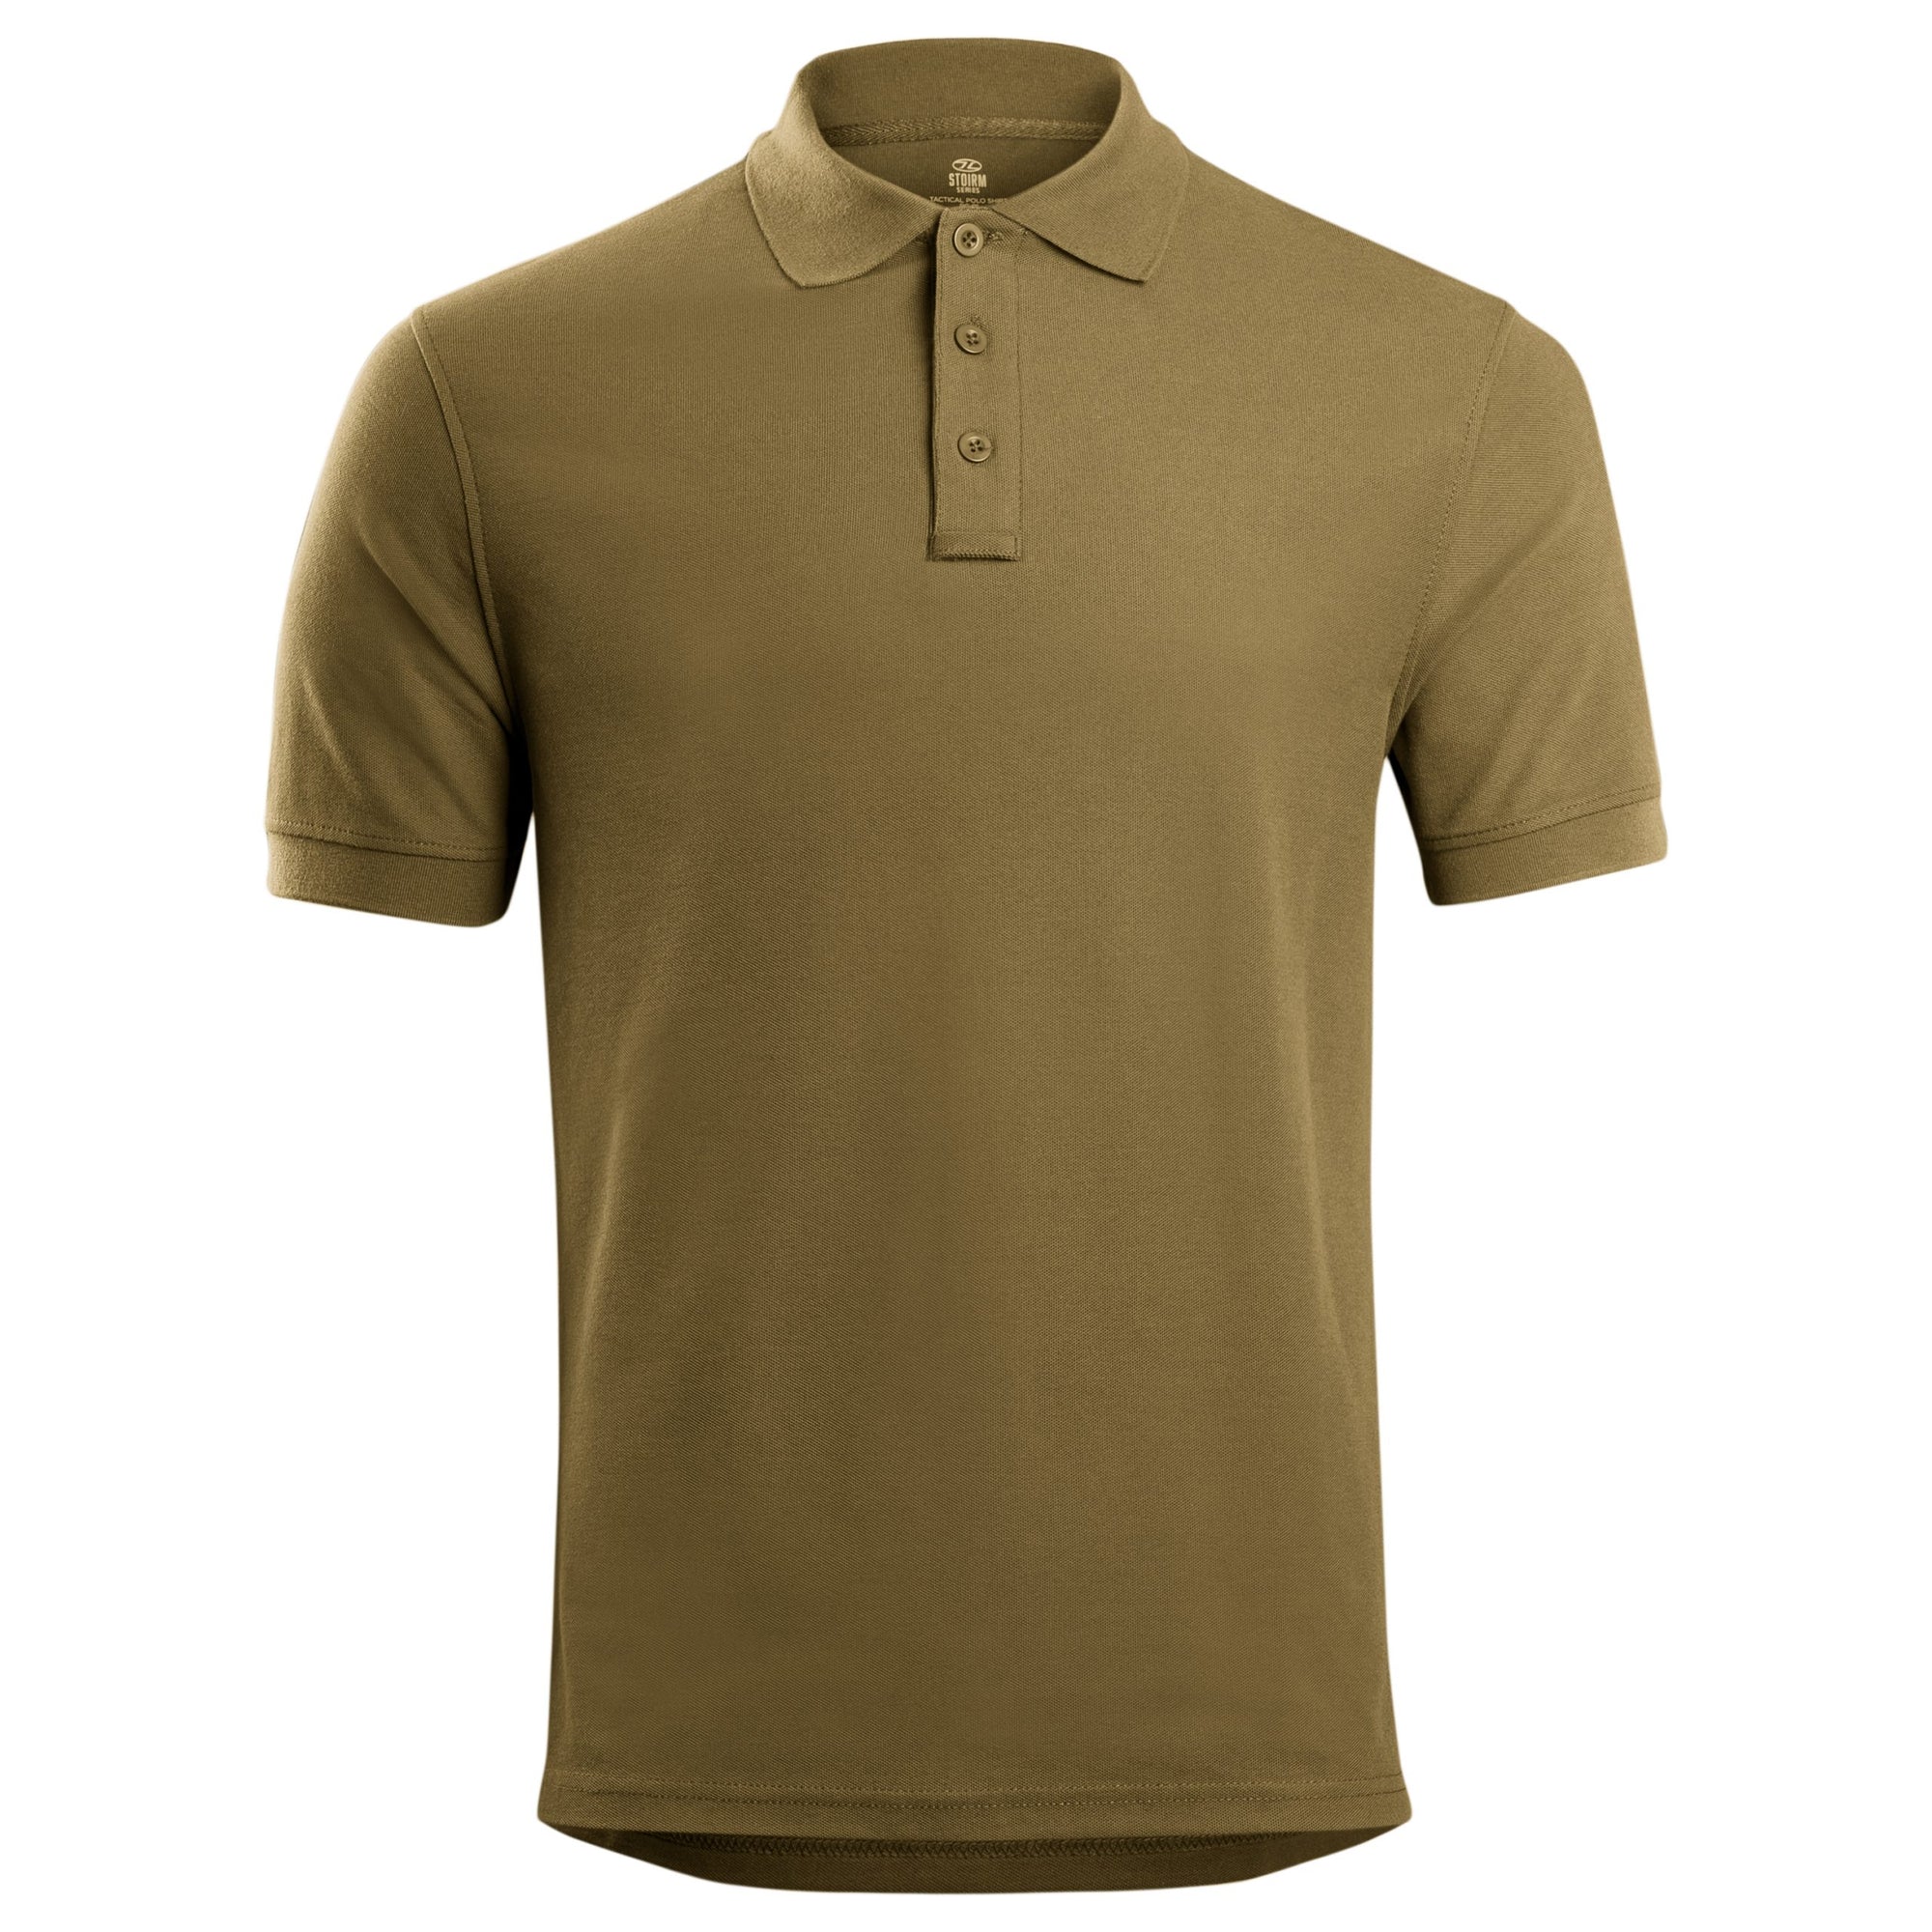 STOIRM Professional Tactical Poloshirt PC01 Coyote Tan